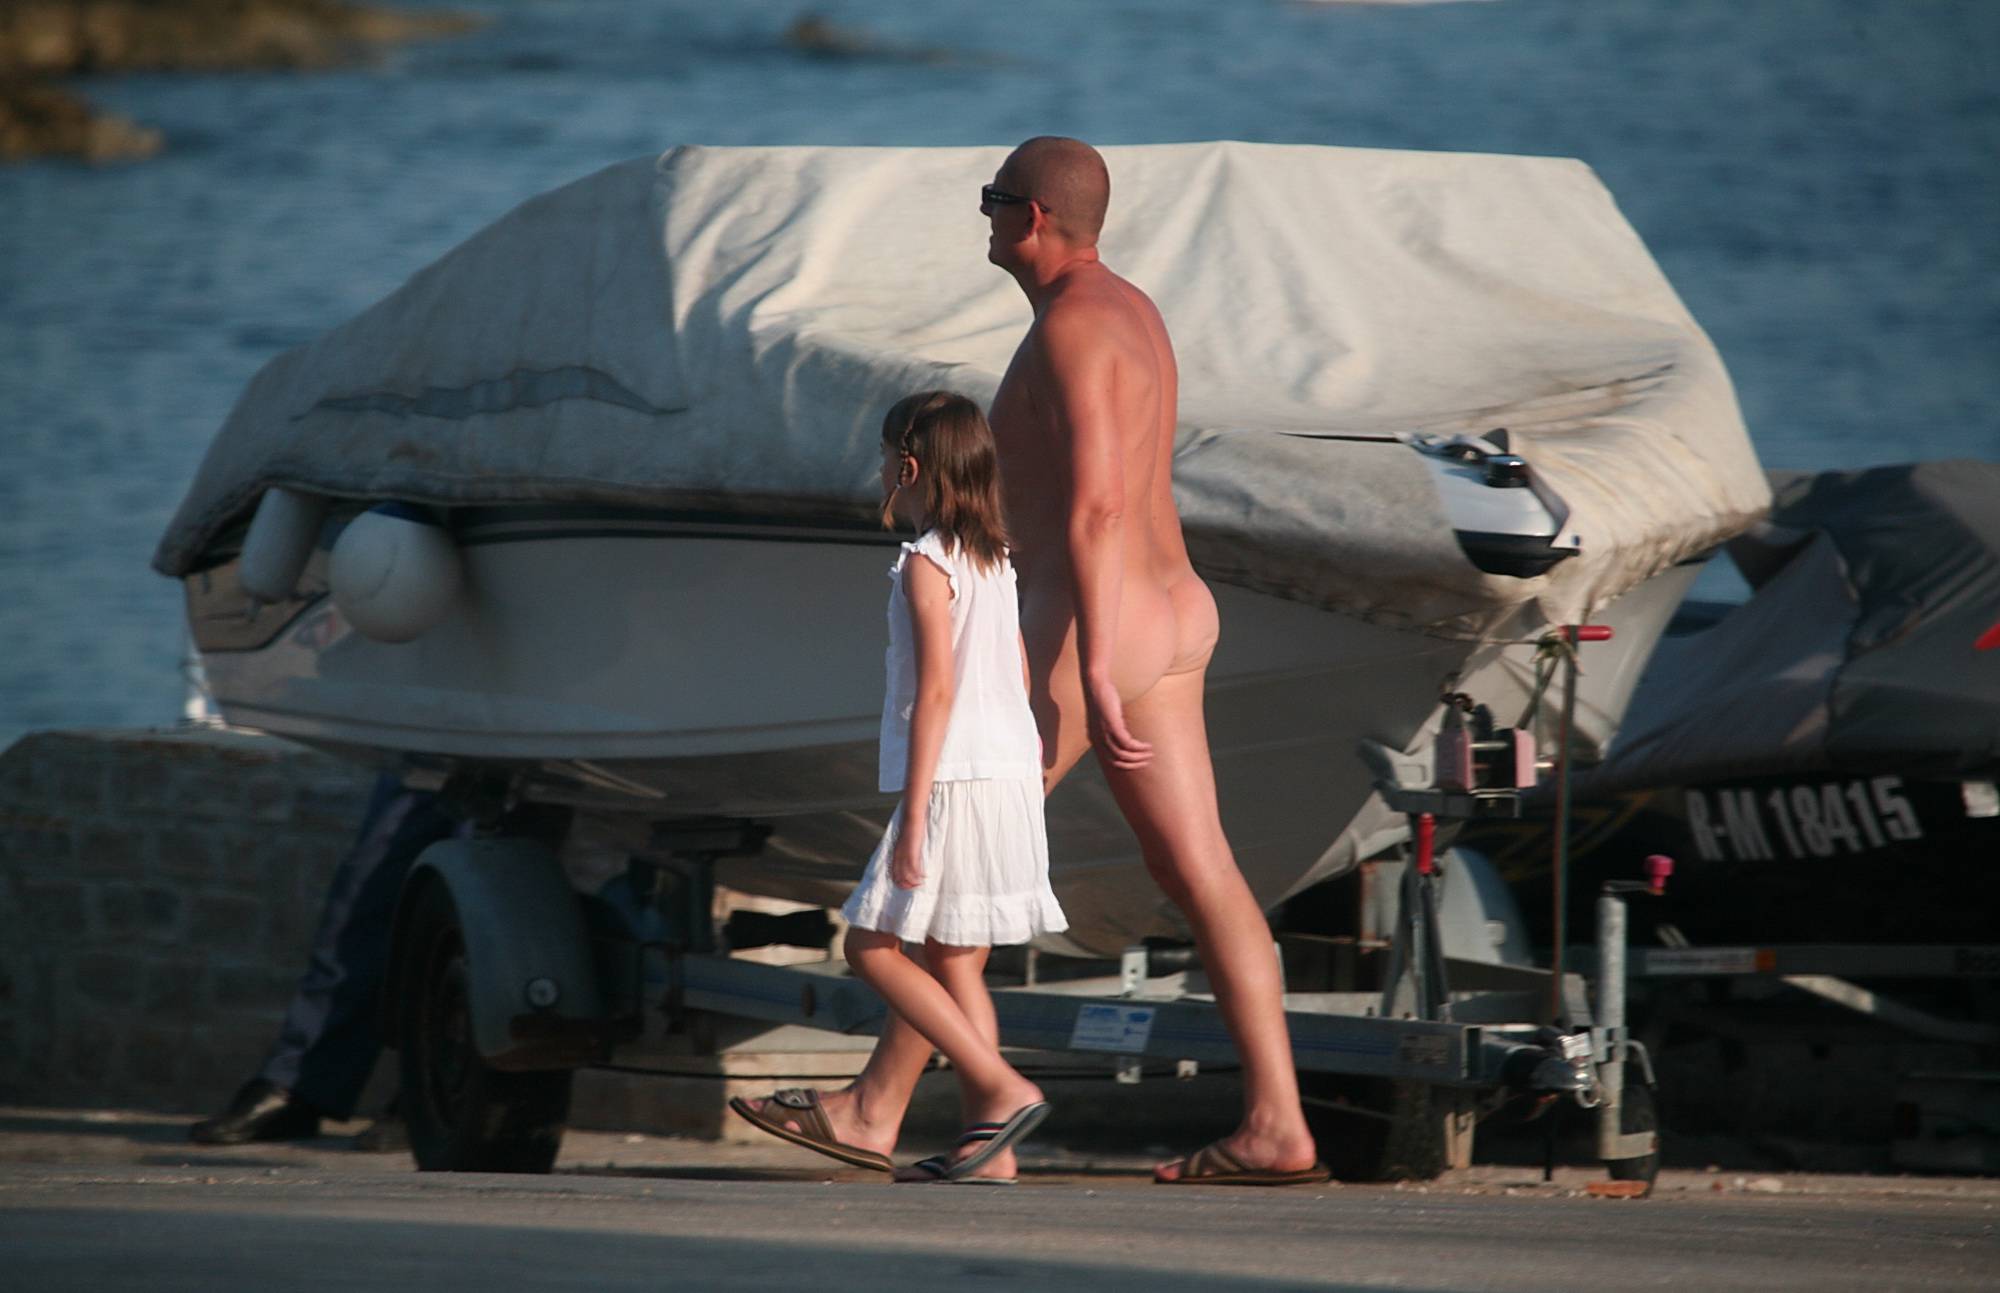 Pure Nudism Gallery Walk by the Boats and Car - 2